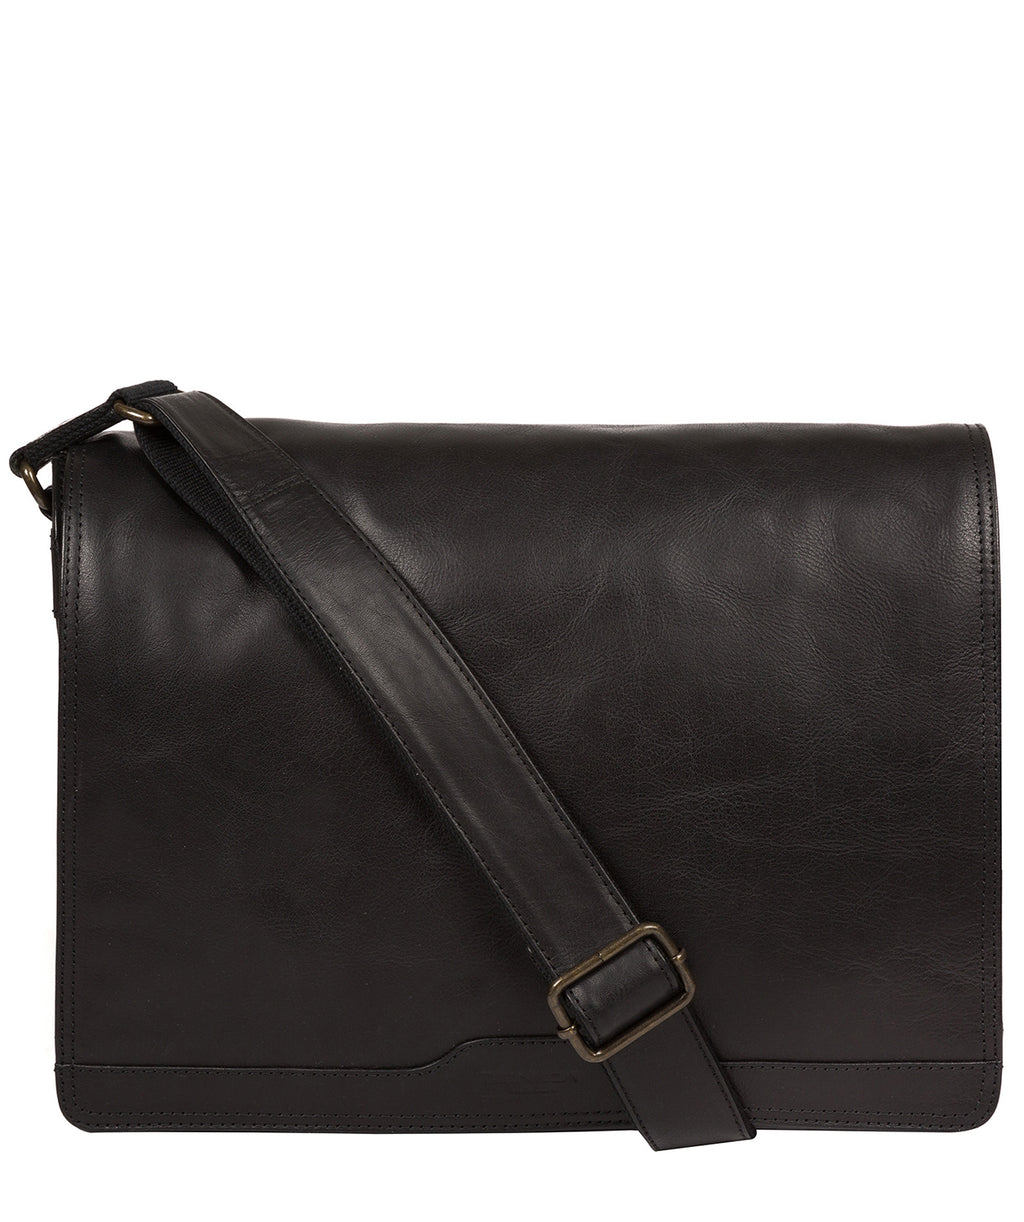 Black Leather Messenger Bag 'Zico' by Conkca London – Pure Luxuries London